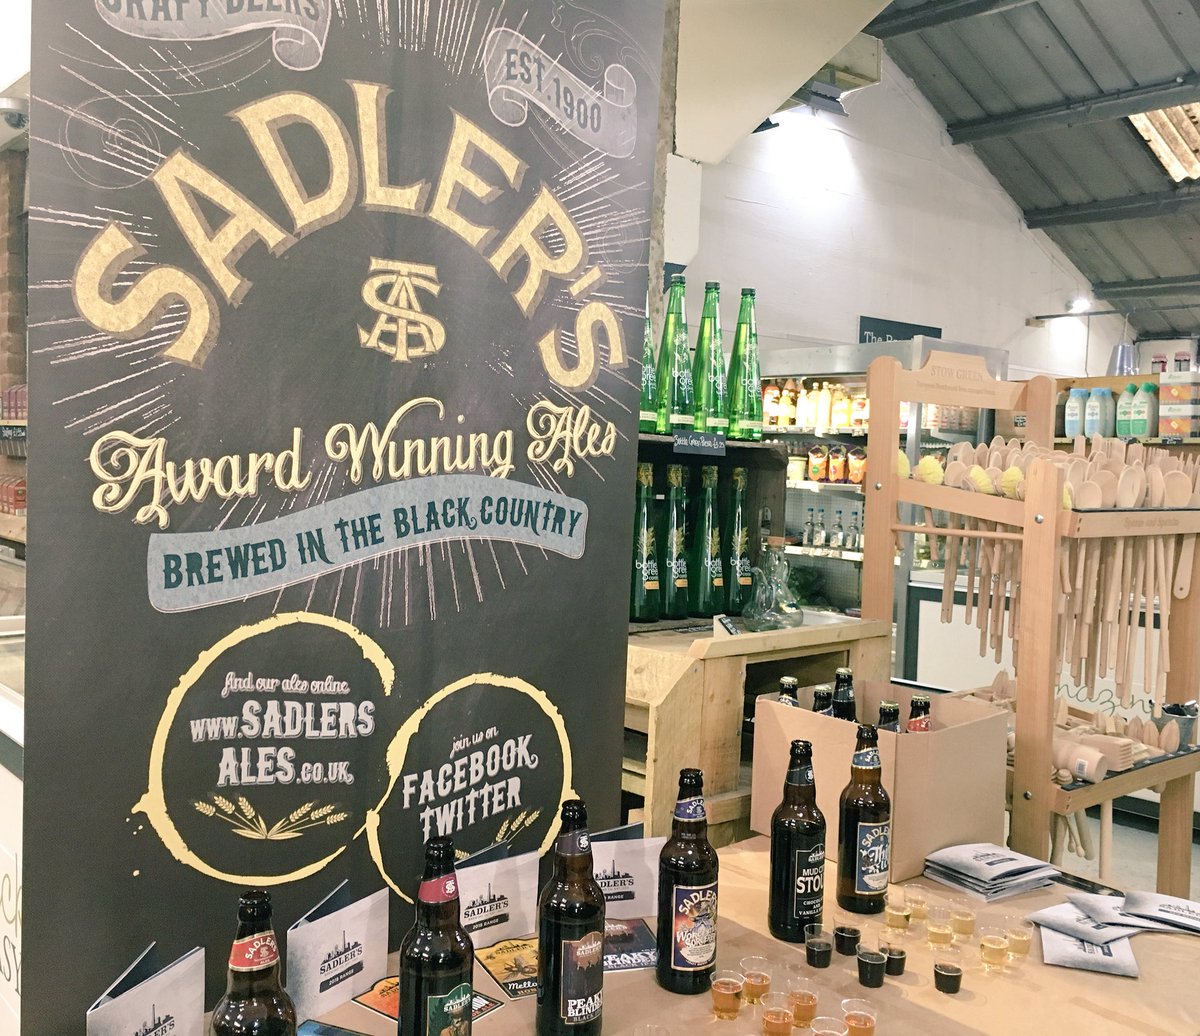 Fancy a little taste? Pop down to Hodge Hill Garden Centre today. I’ll be passing out the samples! #trybeforeyoubuy @sadlersales @supersalesagent @marc